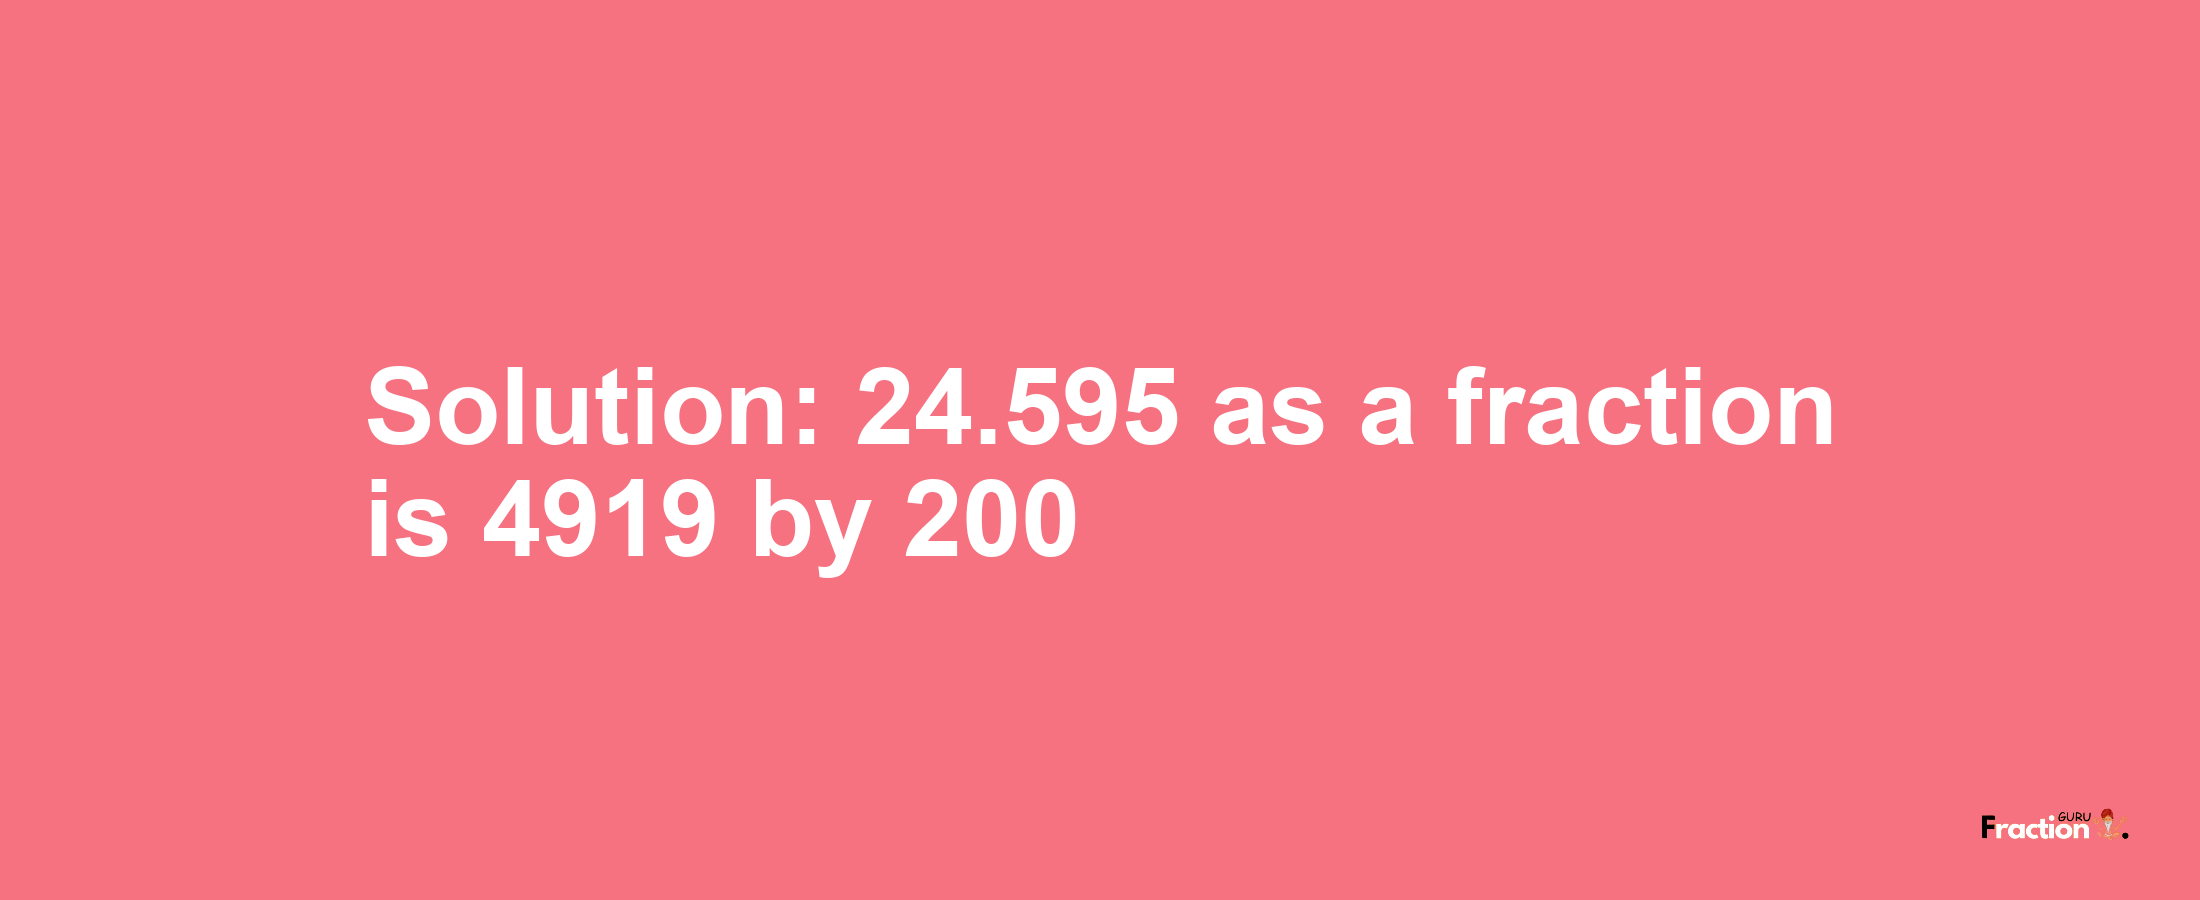 Solution:24.595 as a fraction is 4919/200